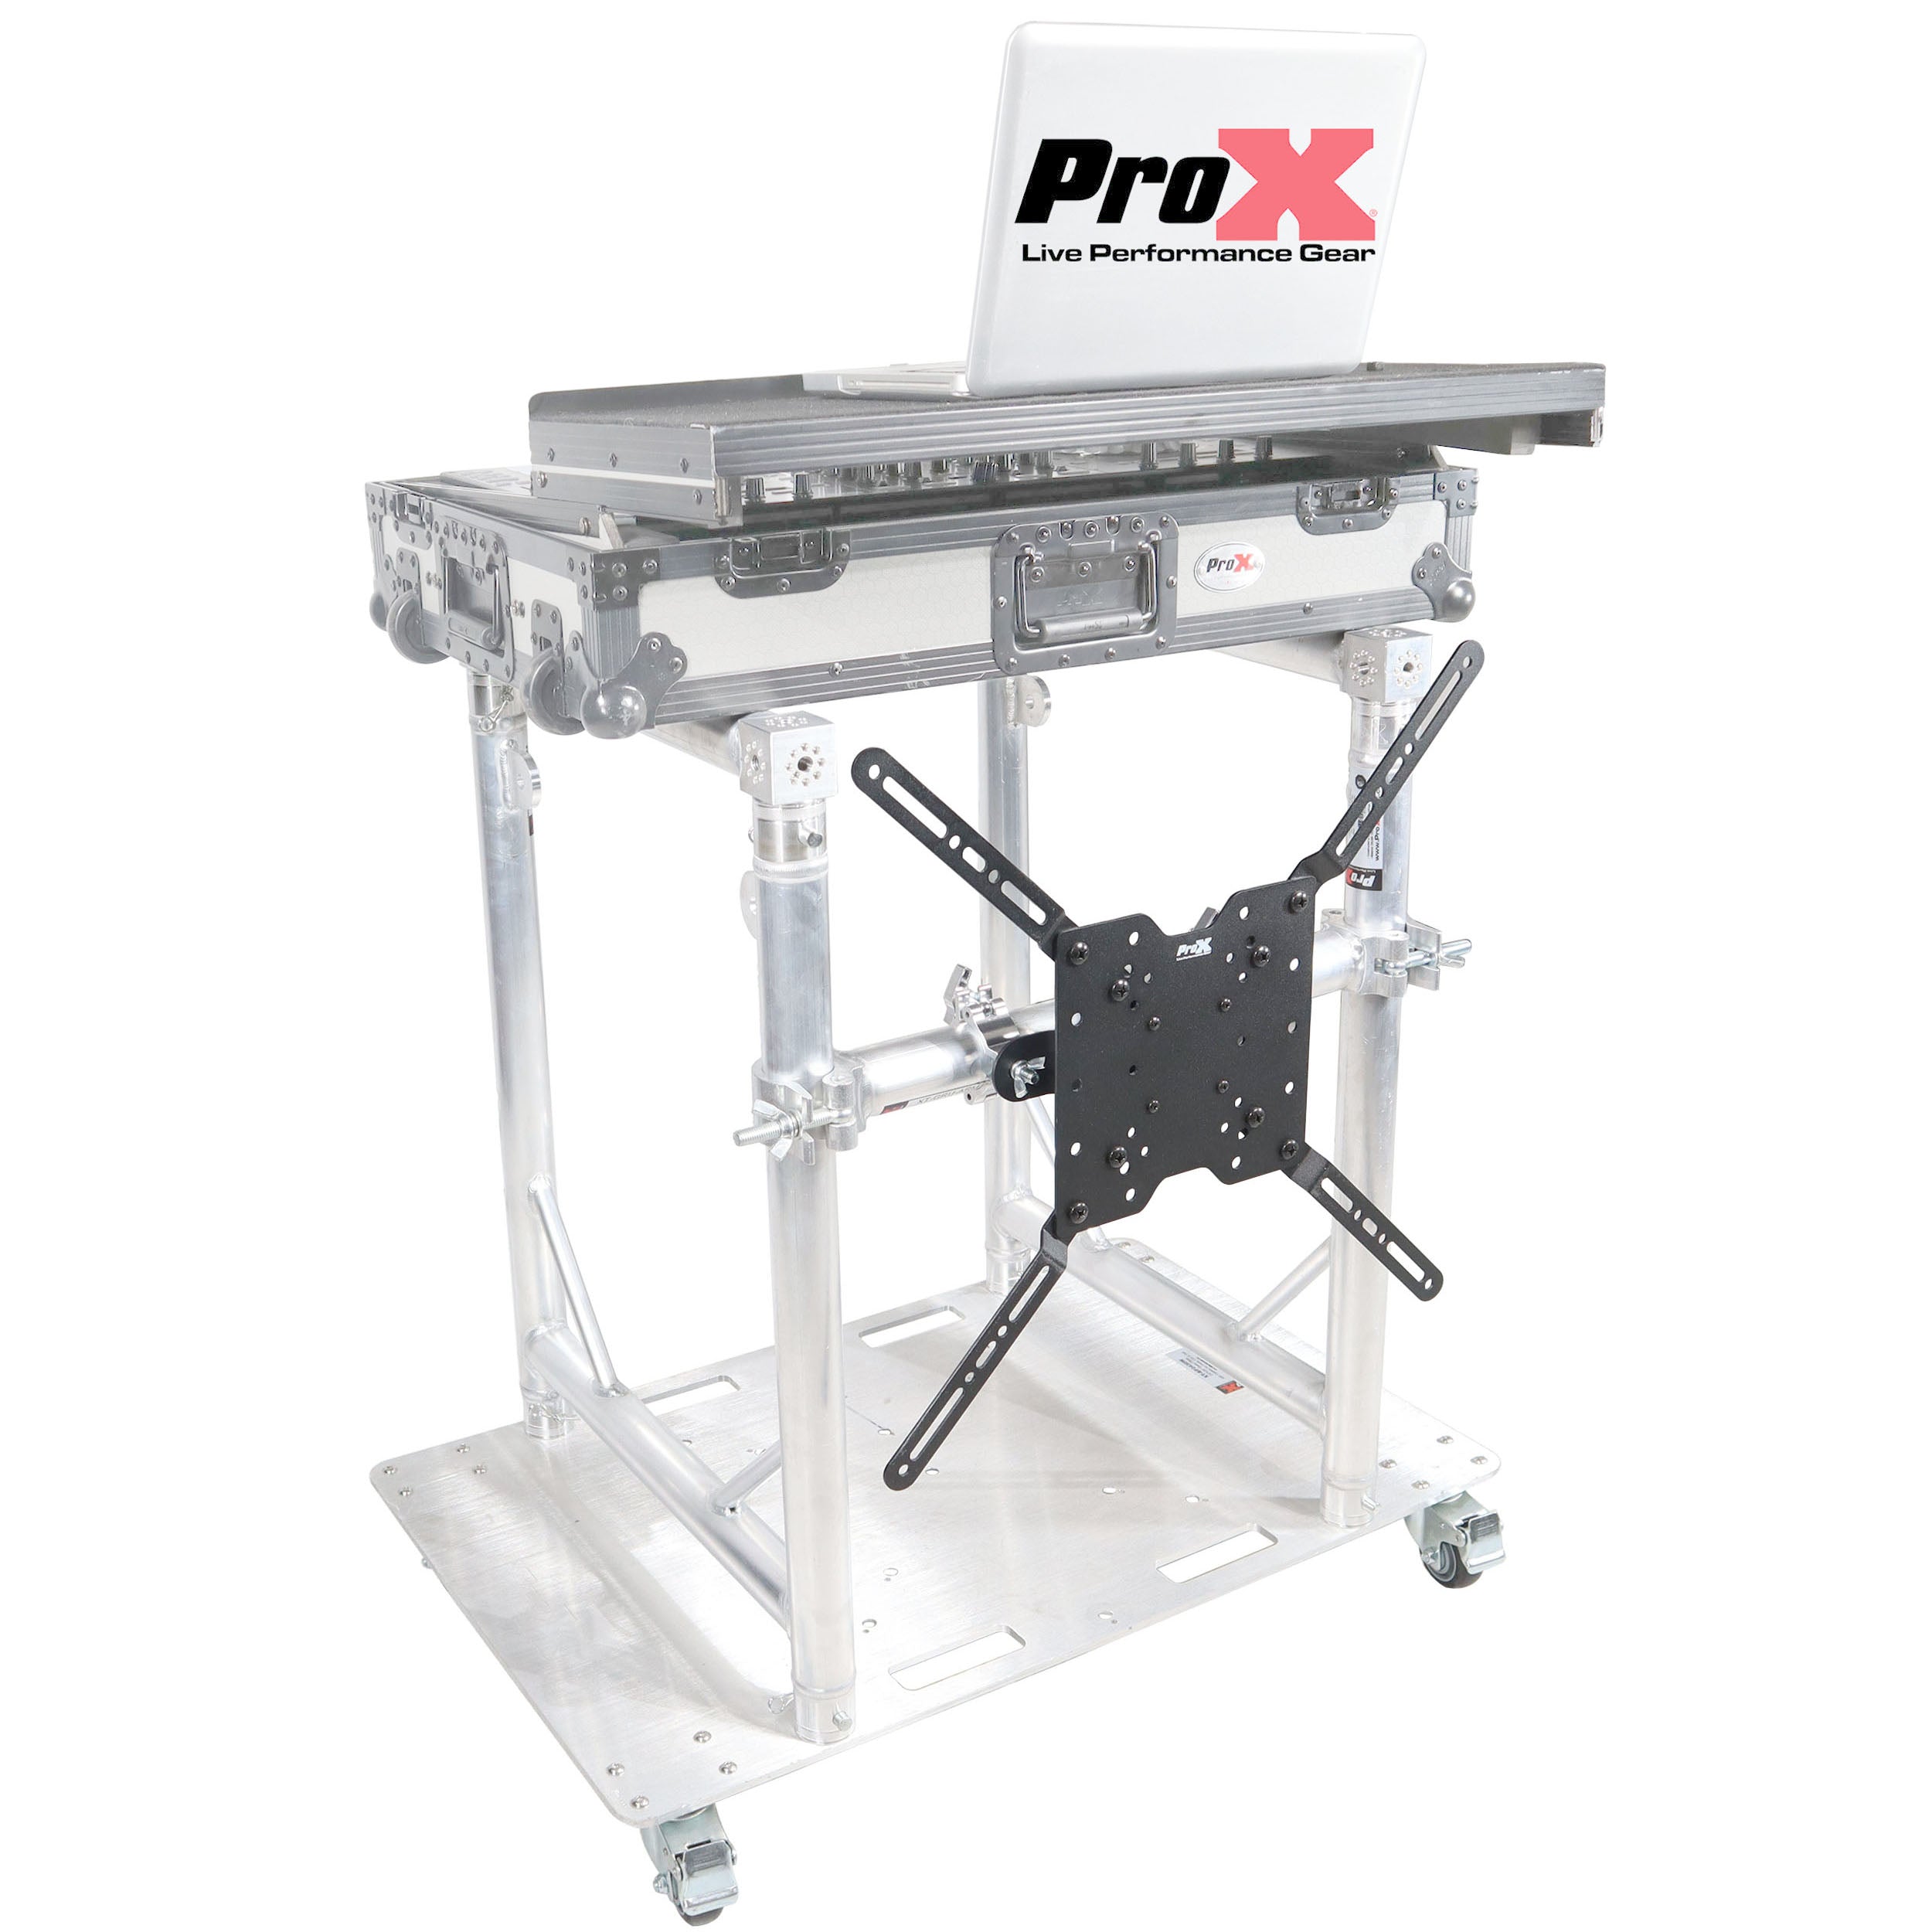 Pro X Modular Mobile Media TV DJ Station Booth for ProX XT-GRU Rapid Grid Modular System and base plate with wheels XT-MMDJTV01